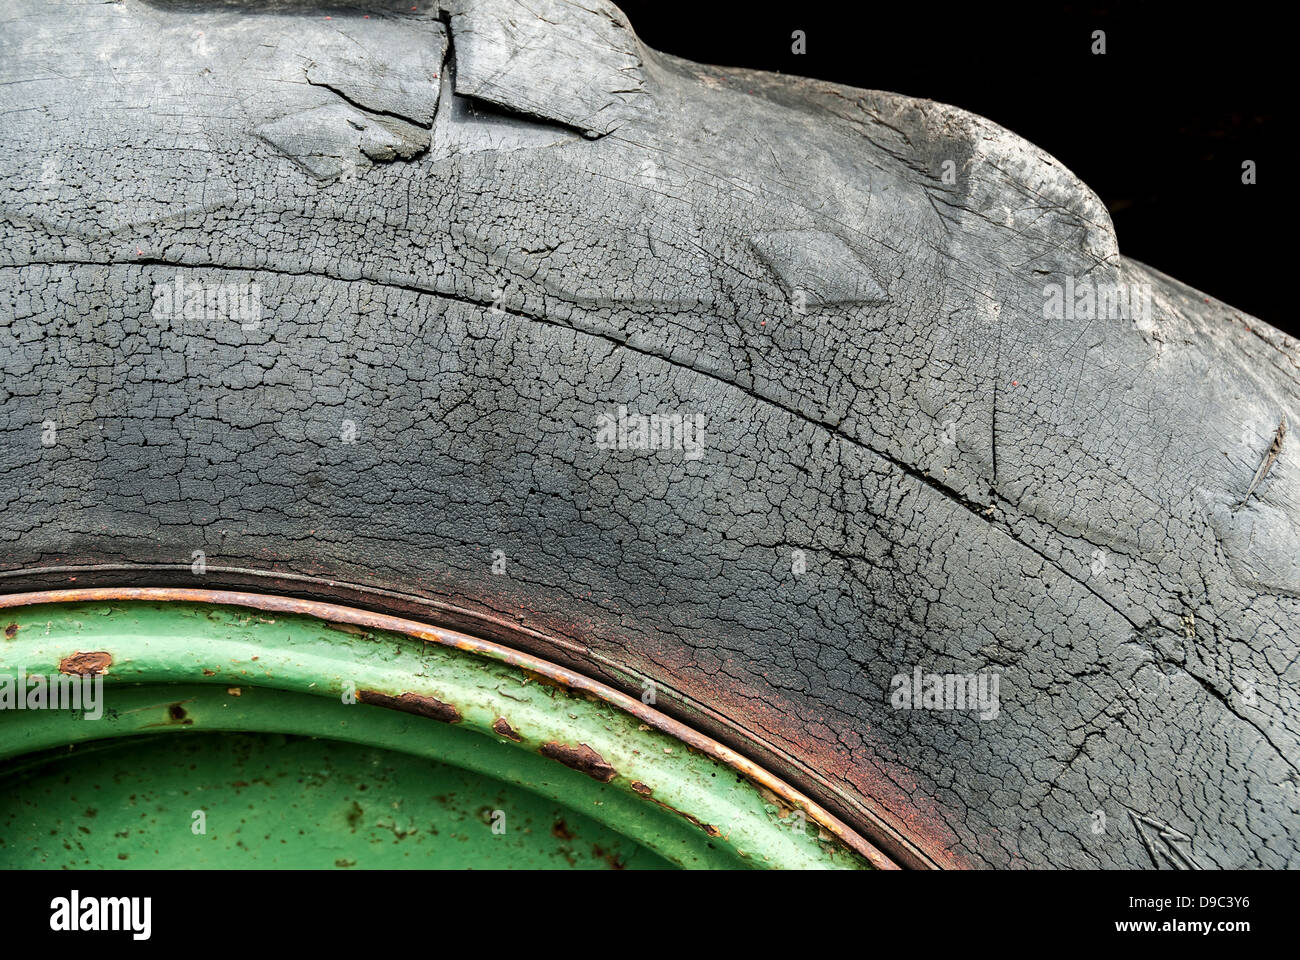 Detail of an old, cracked tractor tire. Stock Photo